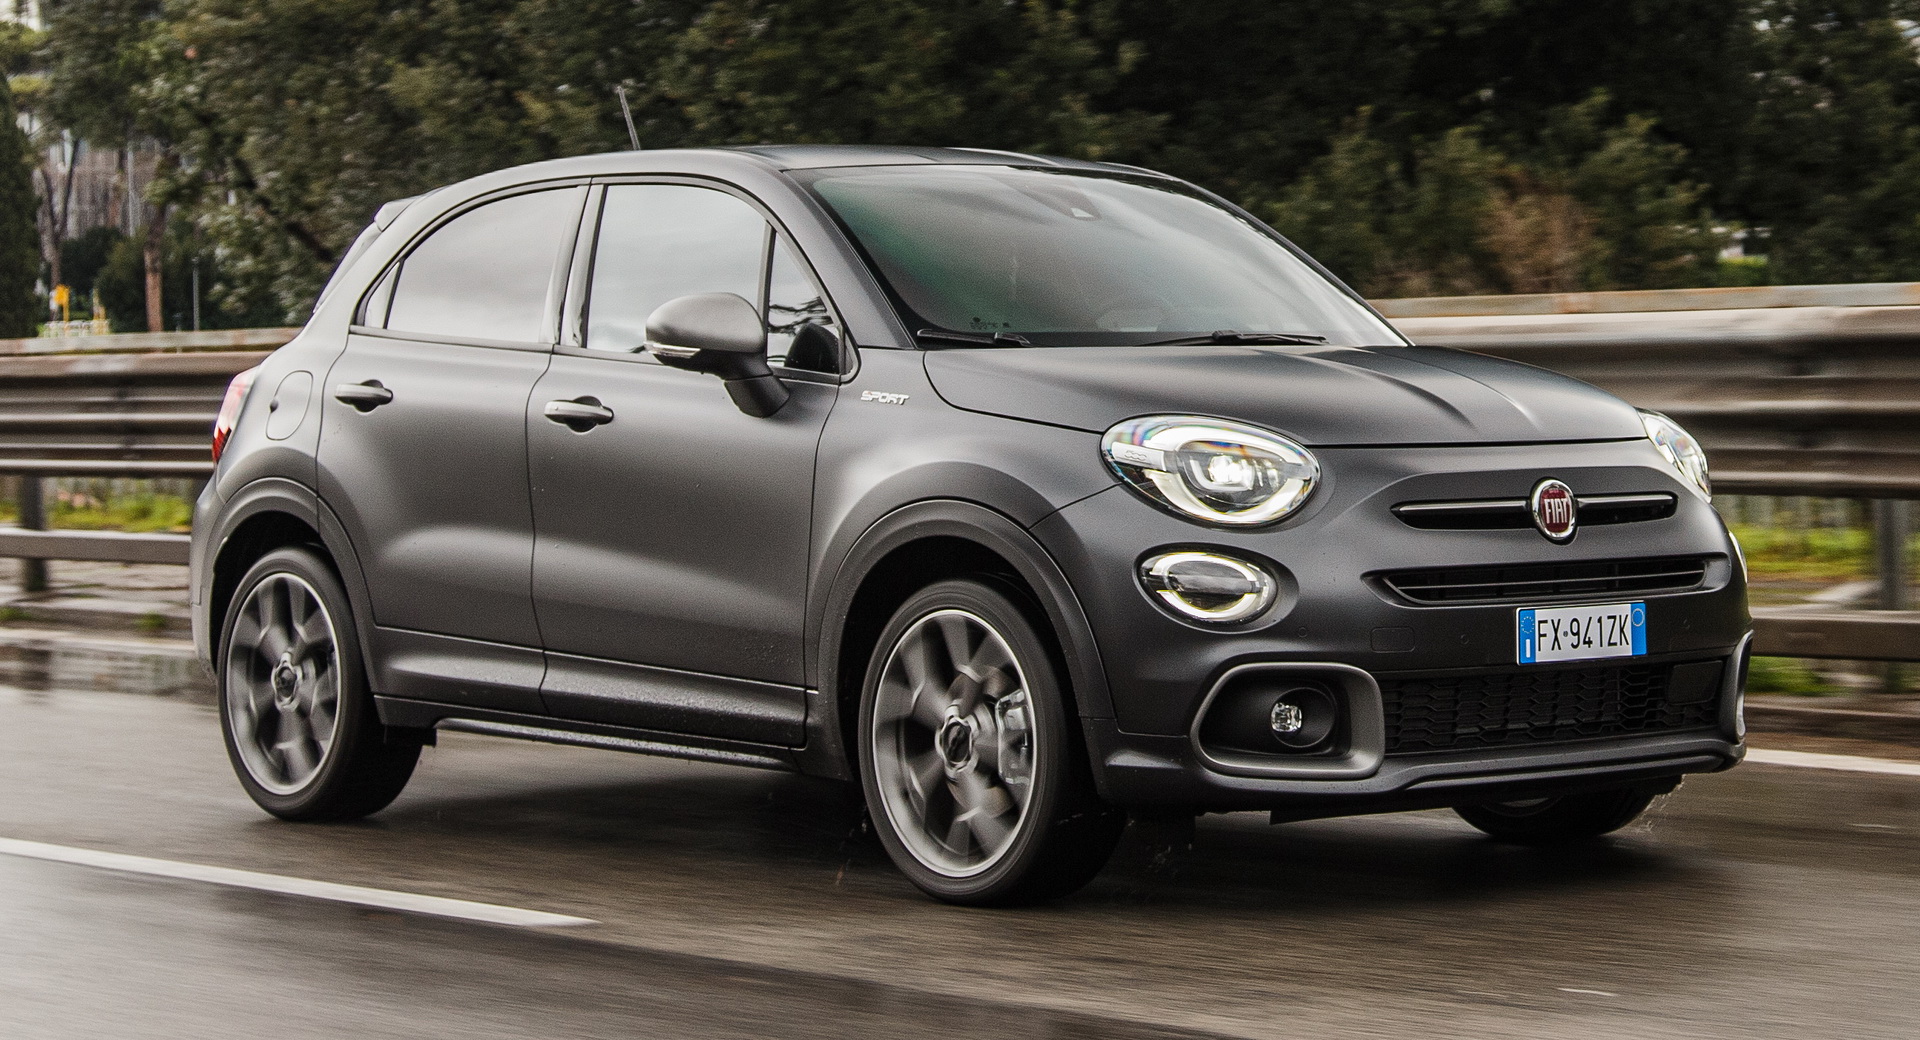 Fiat Updates 500 Model Family In Europe With New Trims